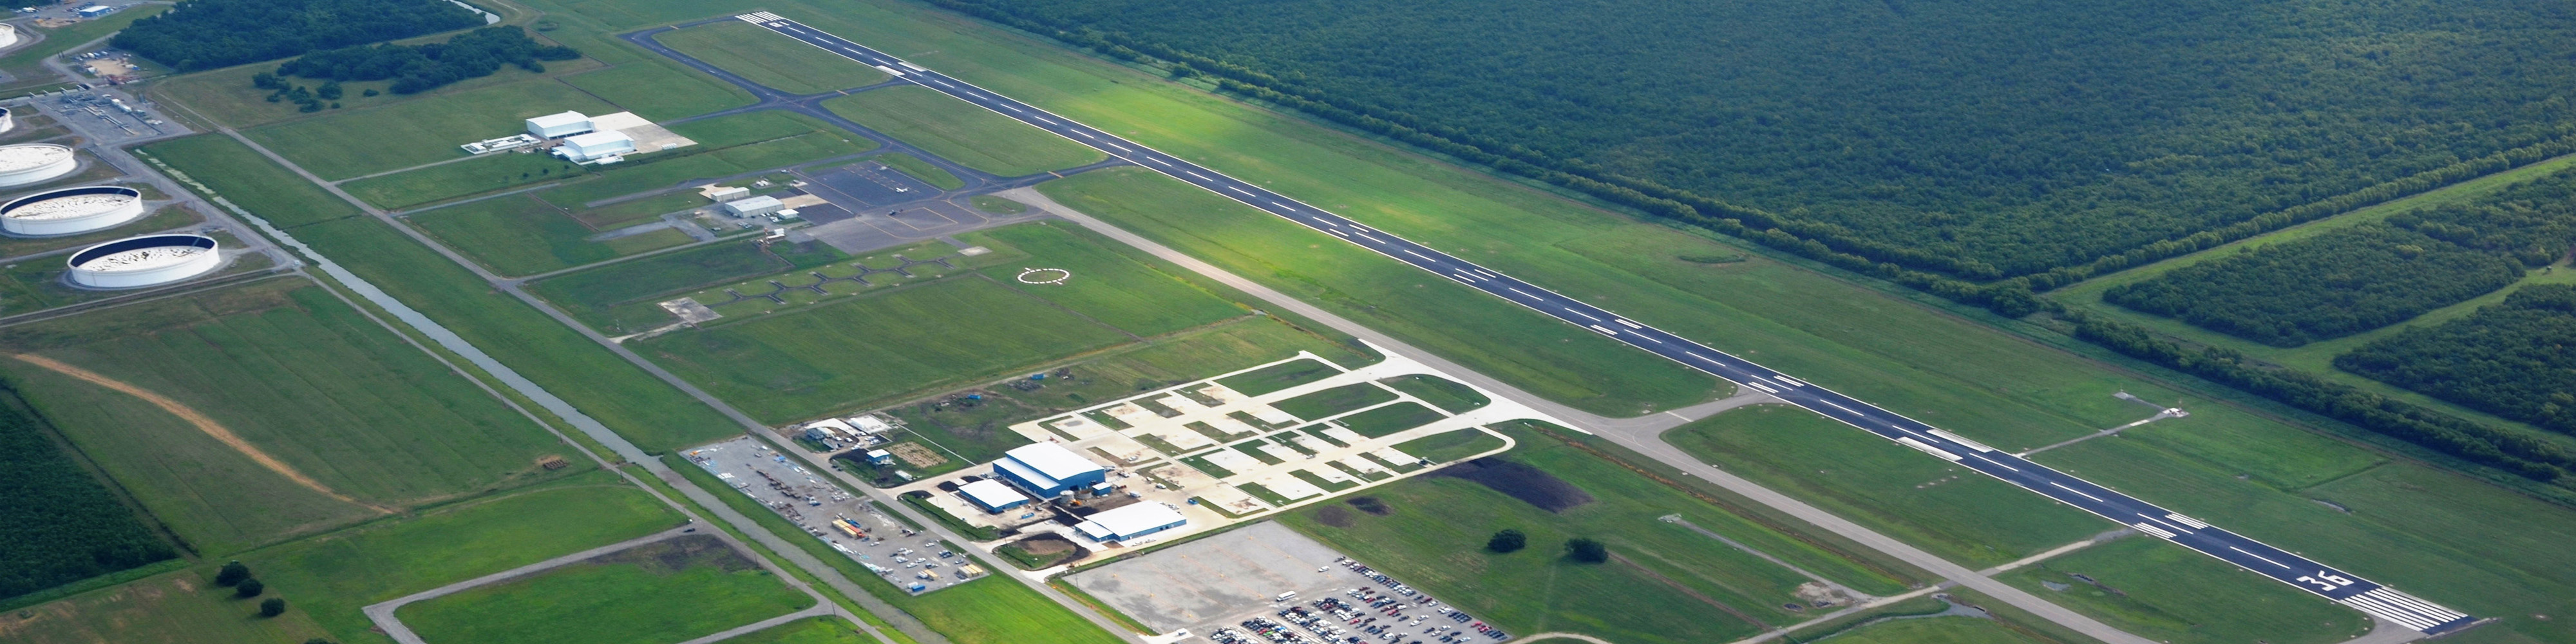 South Lafourche Airport Aerial Photo